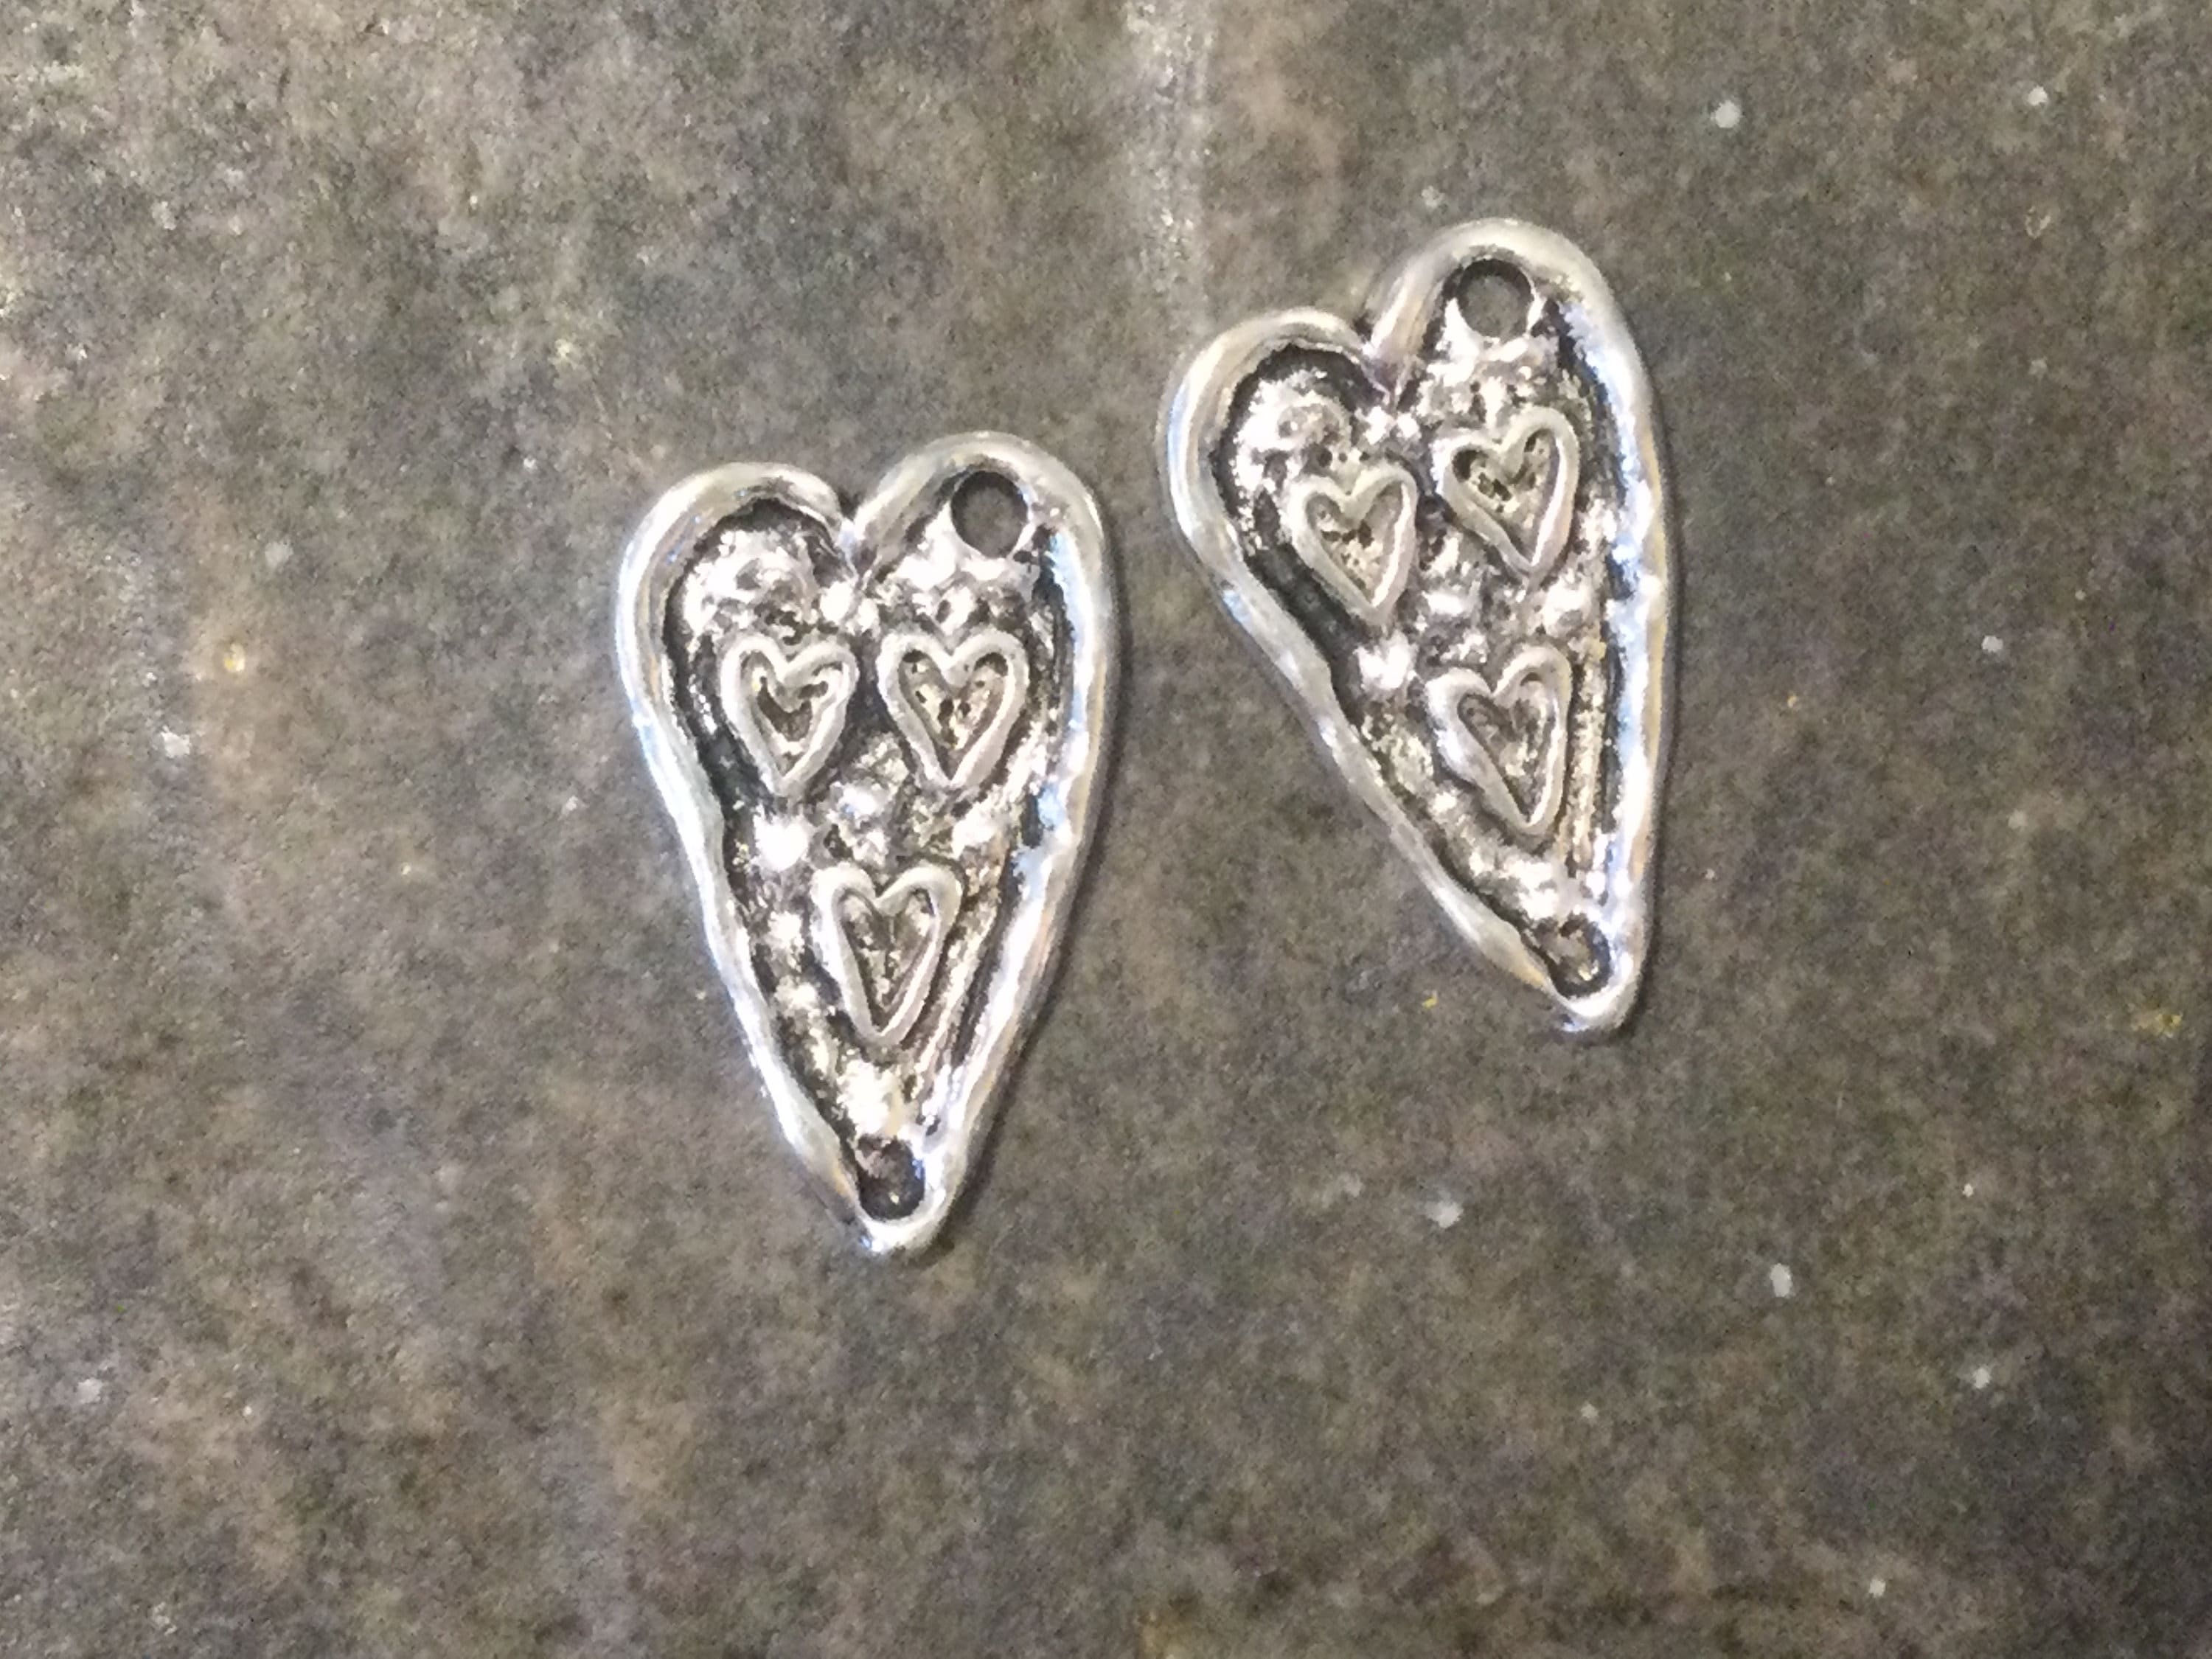 Rustic Artisan Style Heart Charms with Vine Detail Package of 2 Charms for Jewelry Making